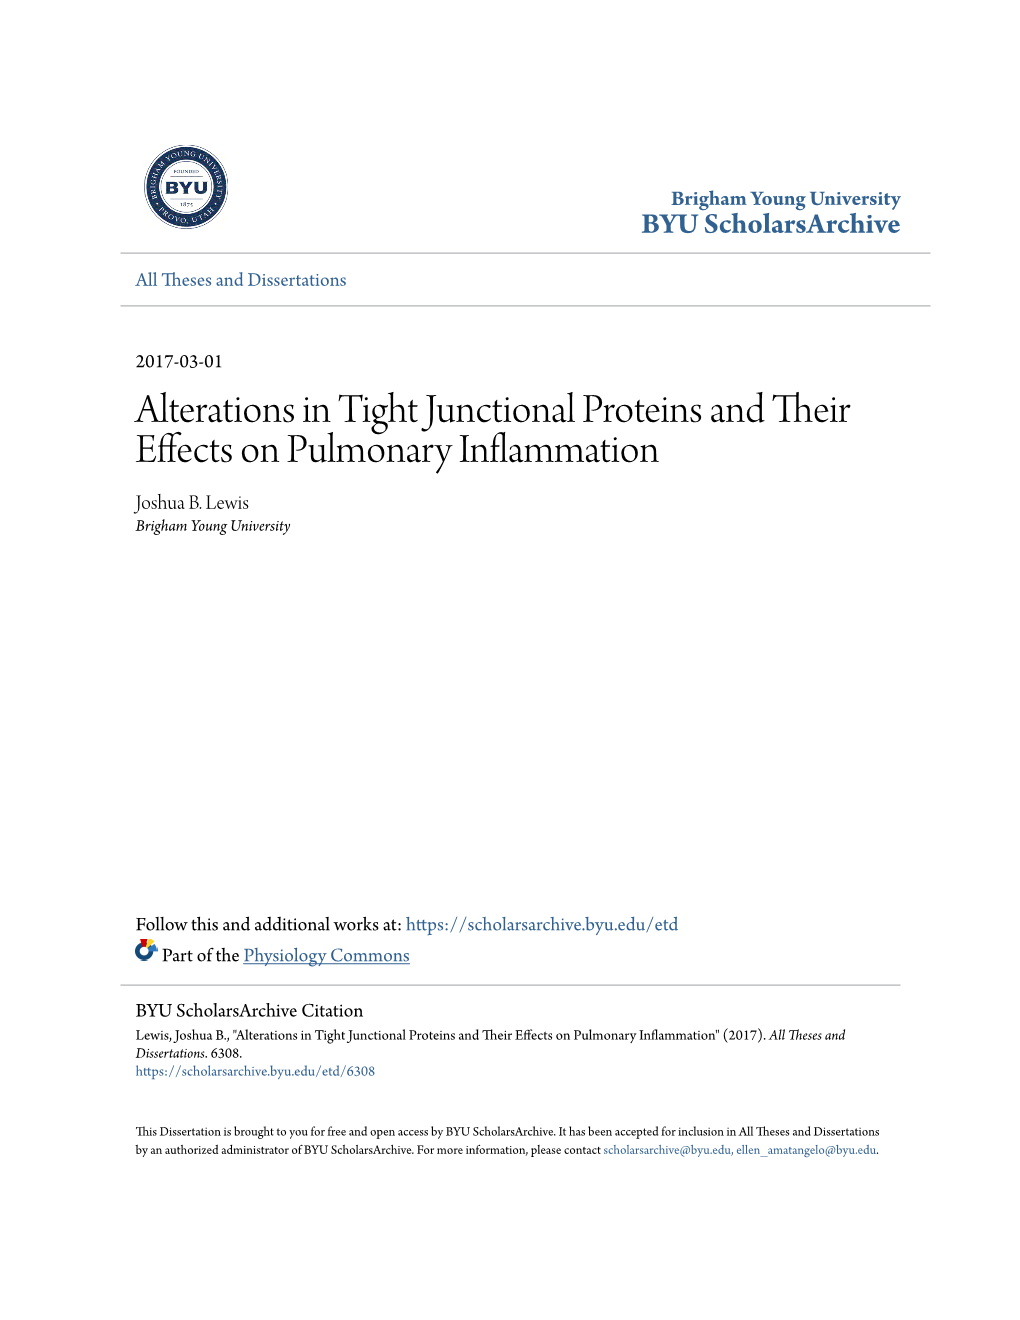 Alterations in Tight Junctional Proteins and Their Effects on Pulmonary Inflammation Joshua B